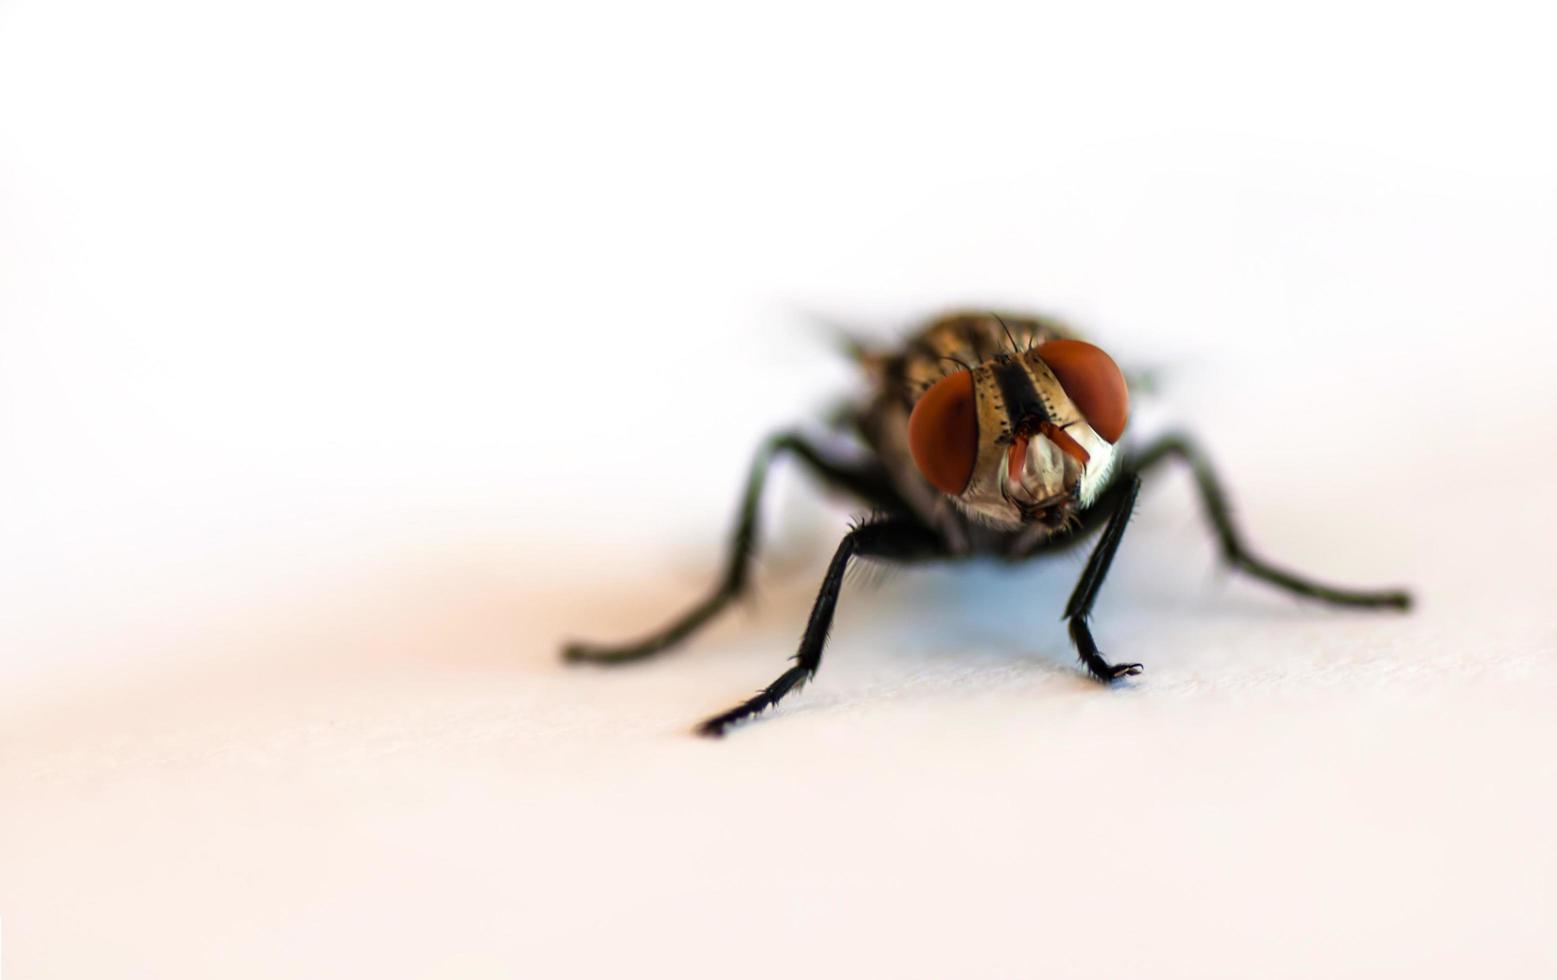 Close up fly focus on head part over white background photo